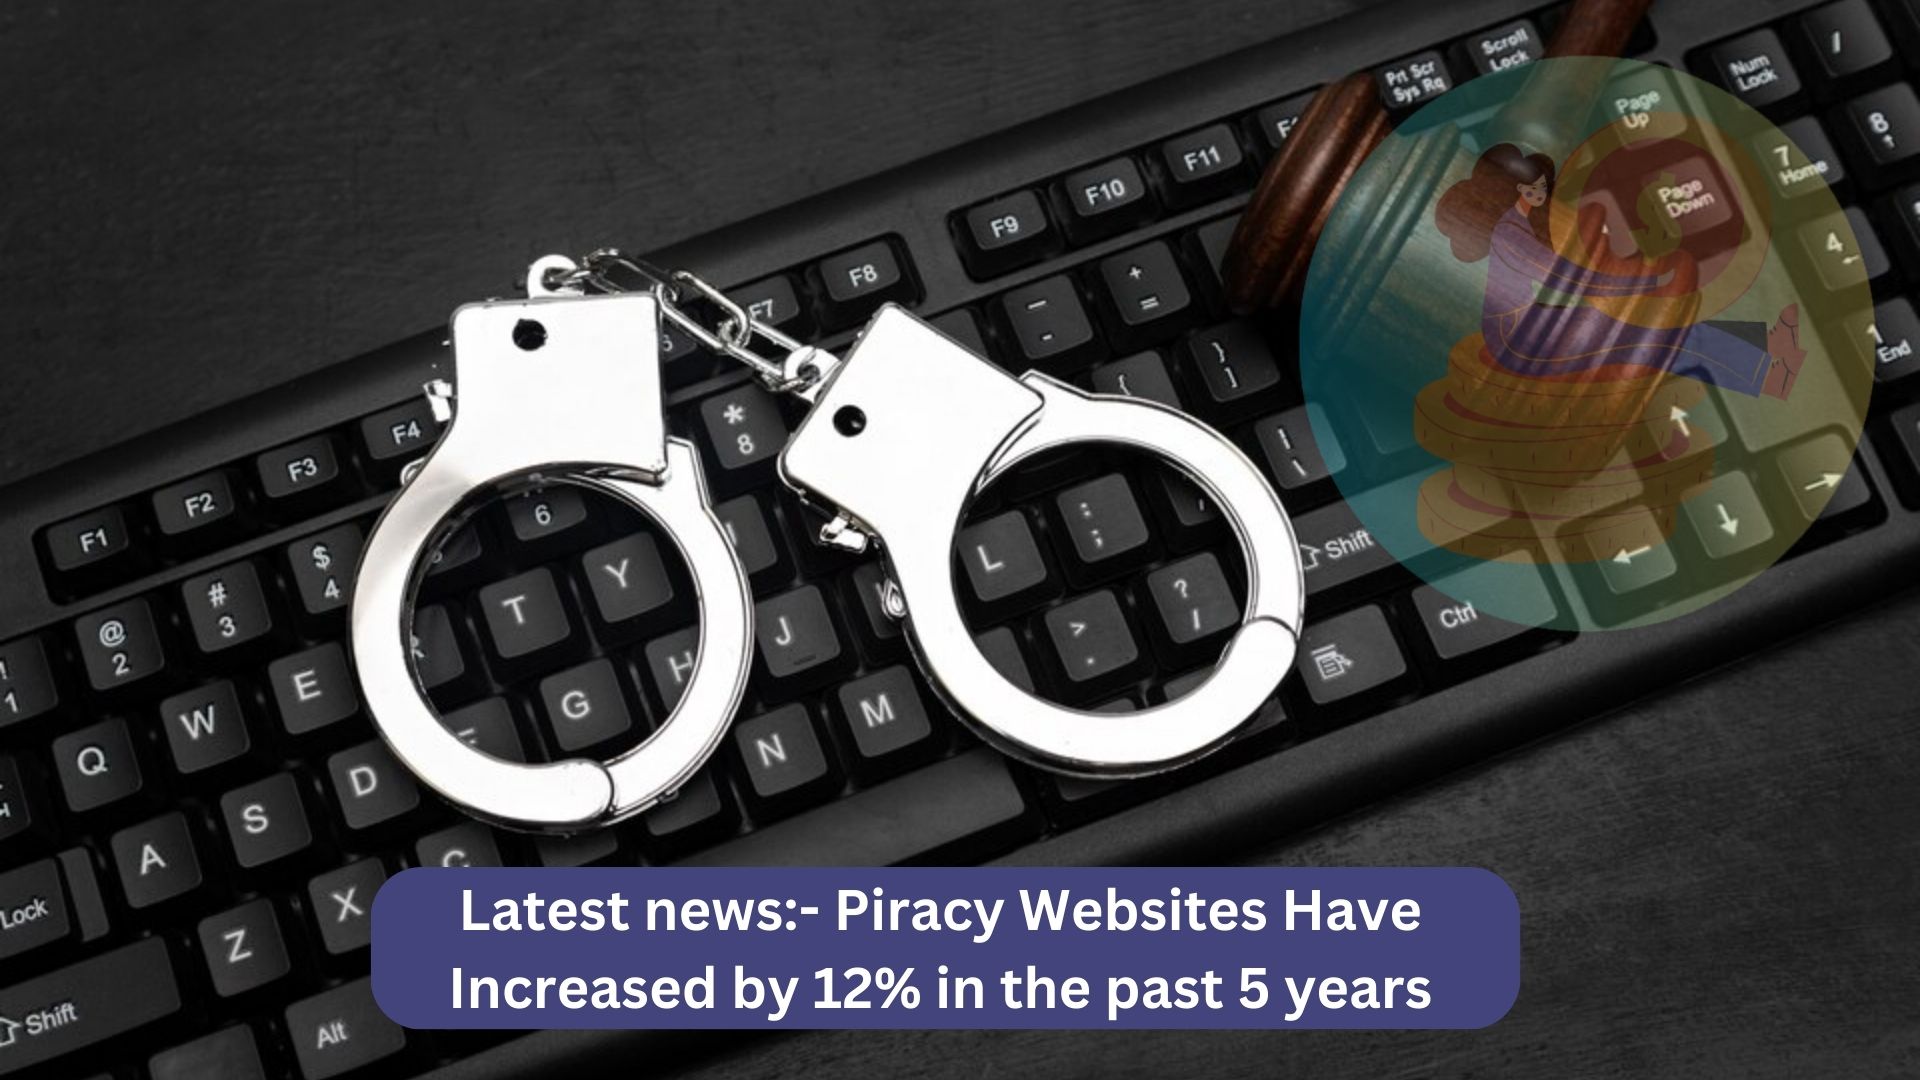 Latest news- Piracy Websites Have Increased by 12% in the past 5 years